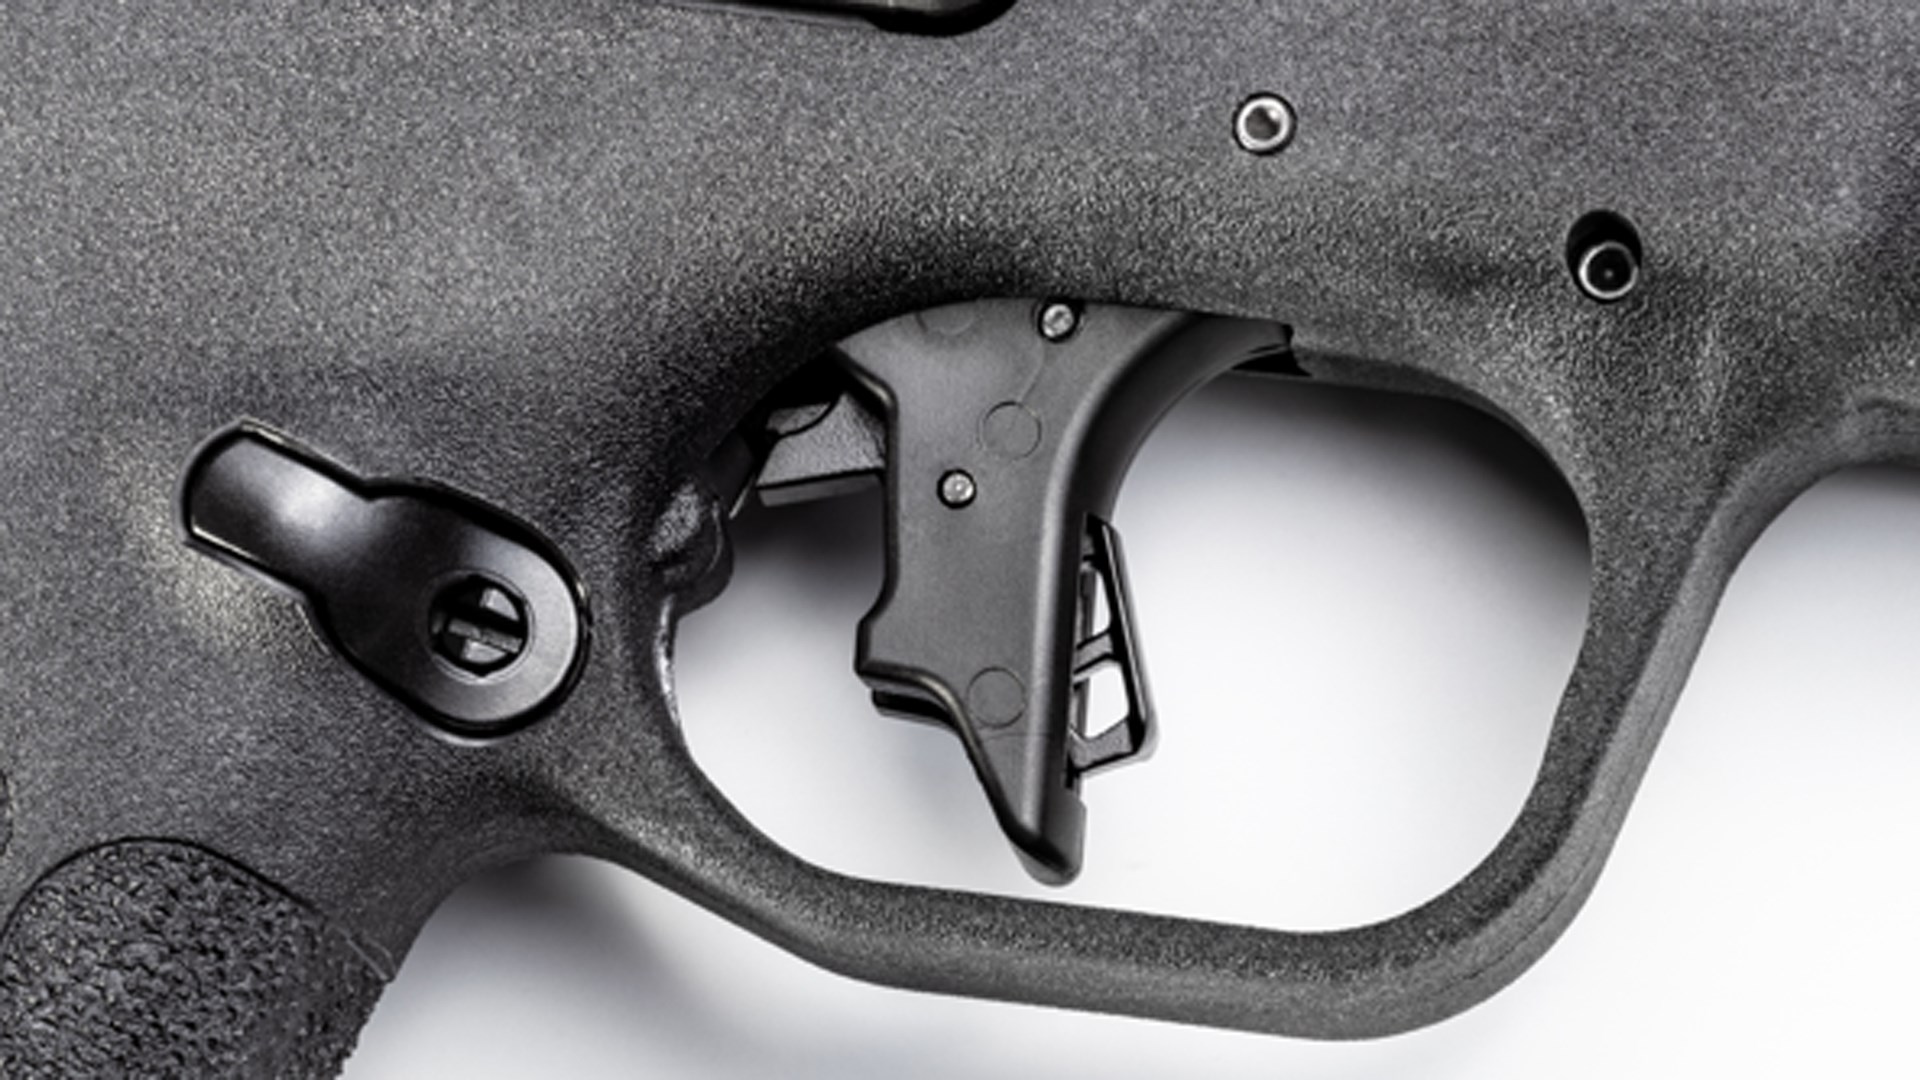 A close-up view of the black trigger on the Smith & Wesson M&P 22 Magnum.